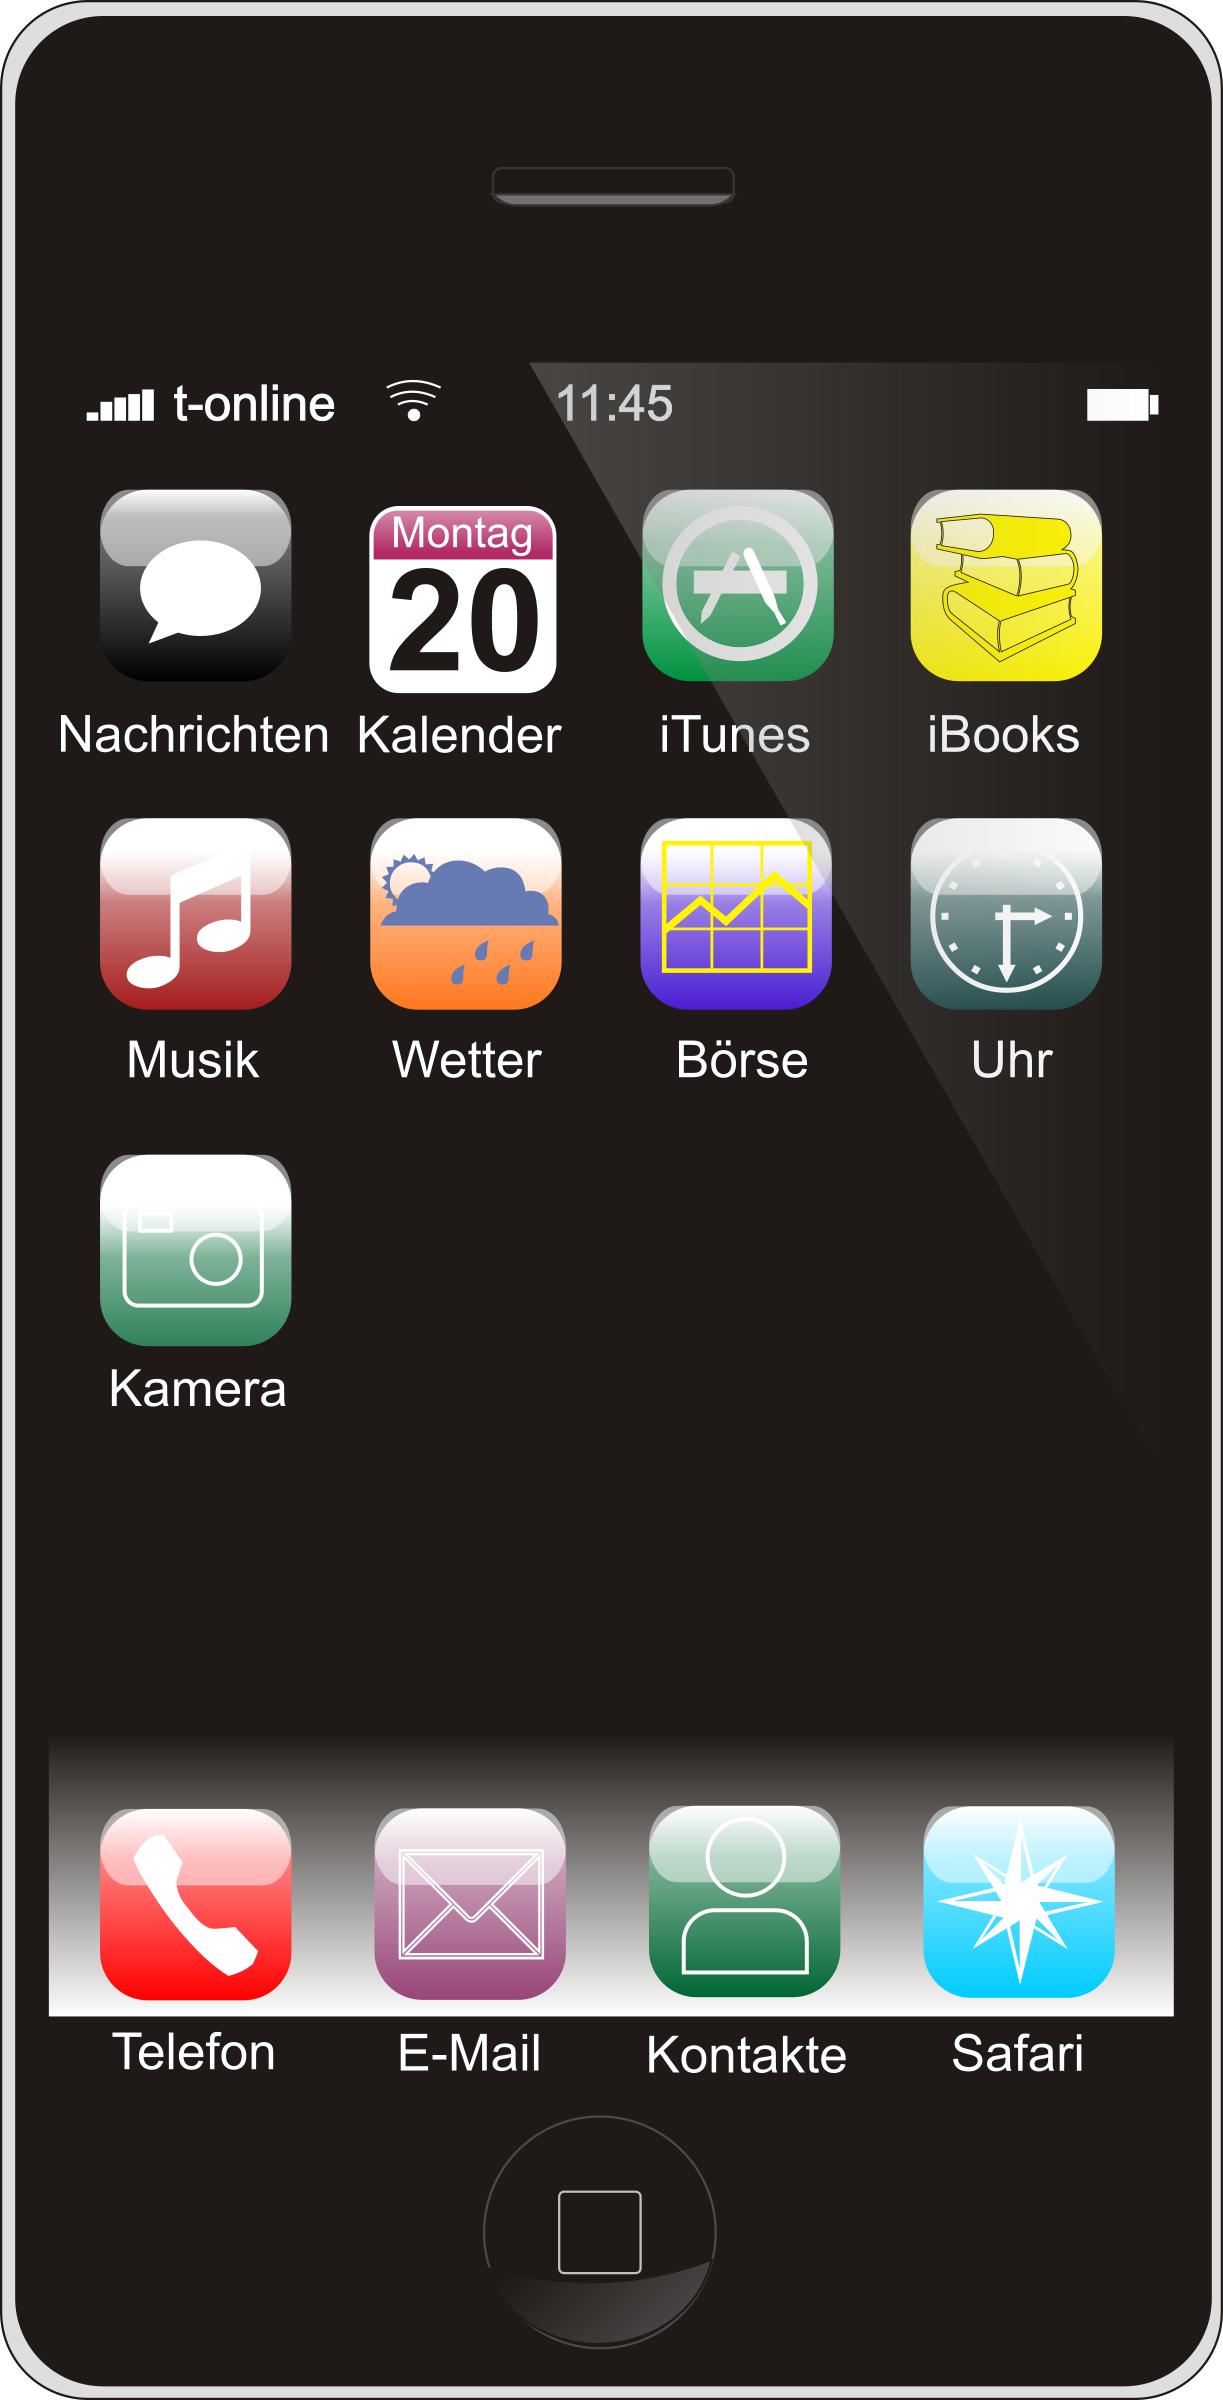 Smartphone (German Version) PNG icons